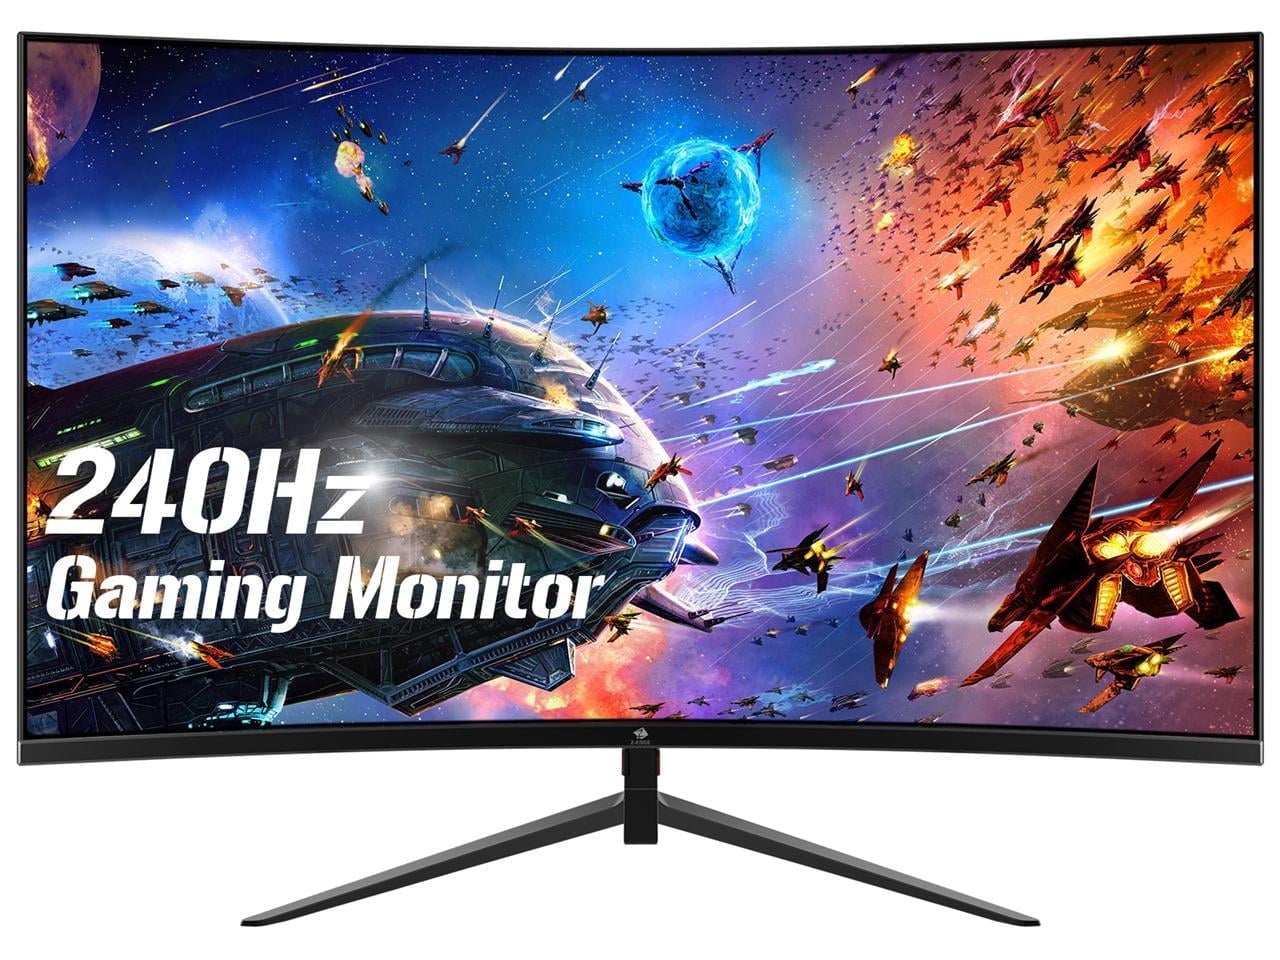 Pre-Owned Z-EDGE 27 inch Curved Gaming Monitor, 240Hz 1ms, FHD 1920x1080, HDR10, FreeSync, 2 x HDMI, 2 x DisplayPort, Built-in Speakers, Black